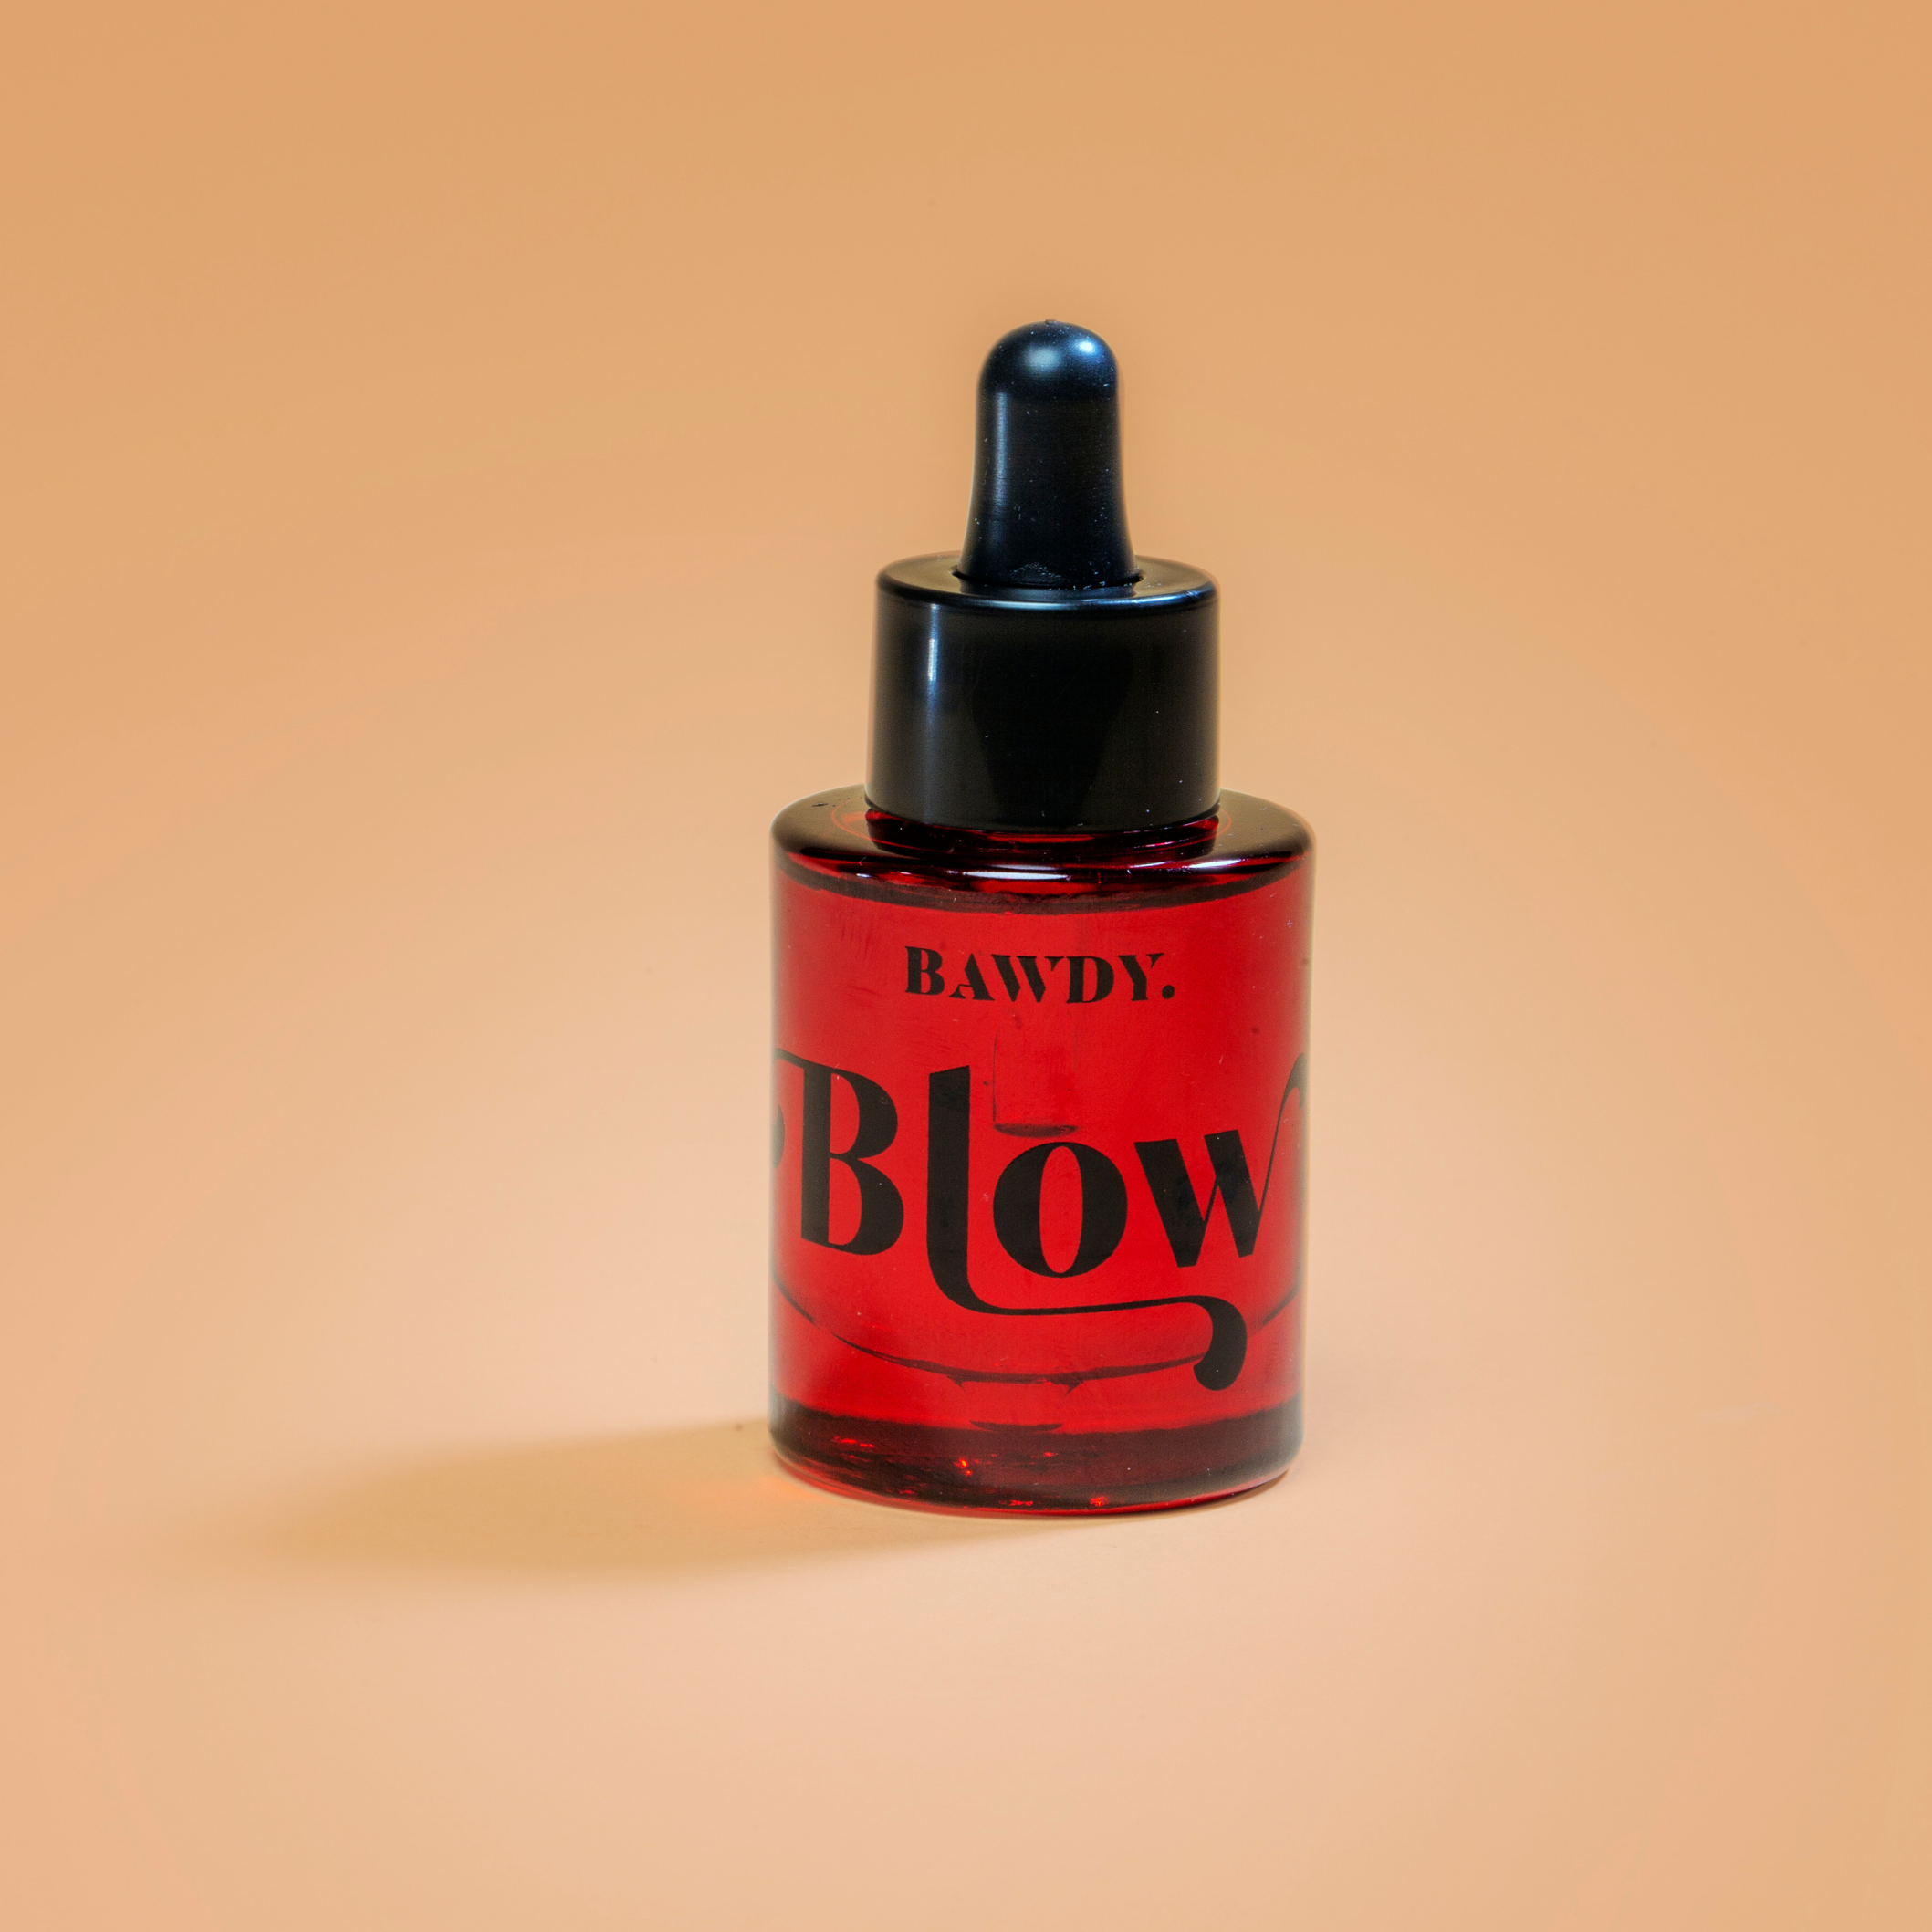 Blow, Bawdy - Intimate lubricant